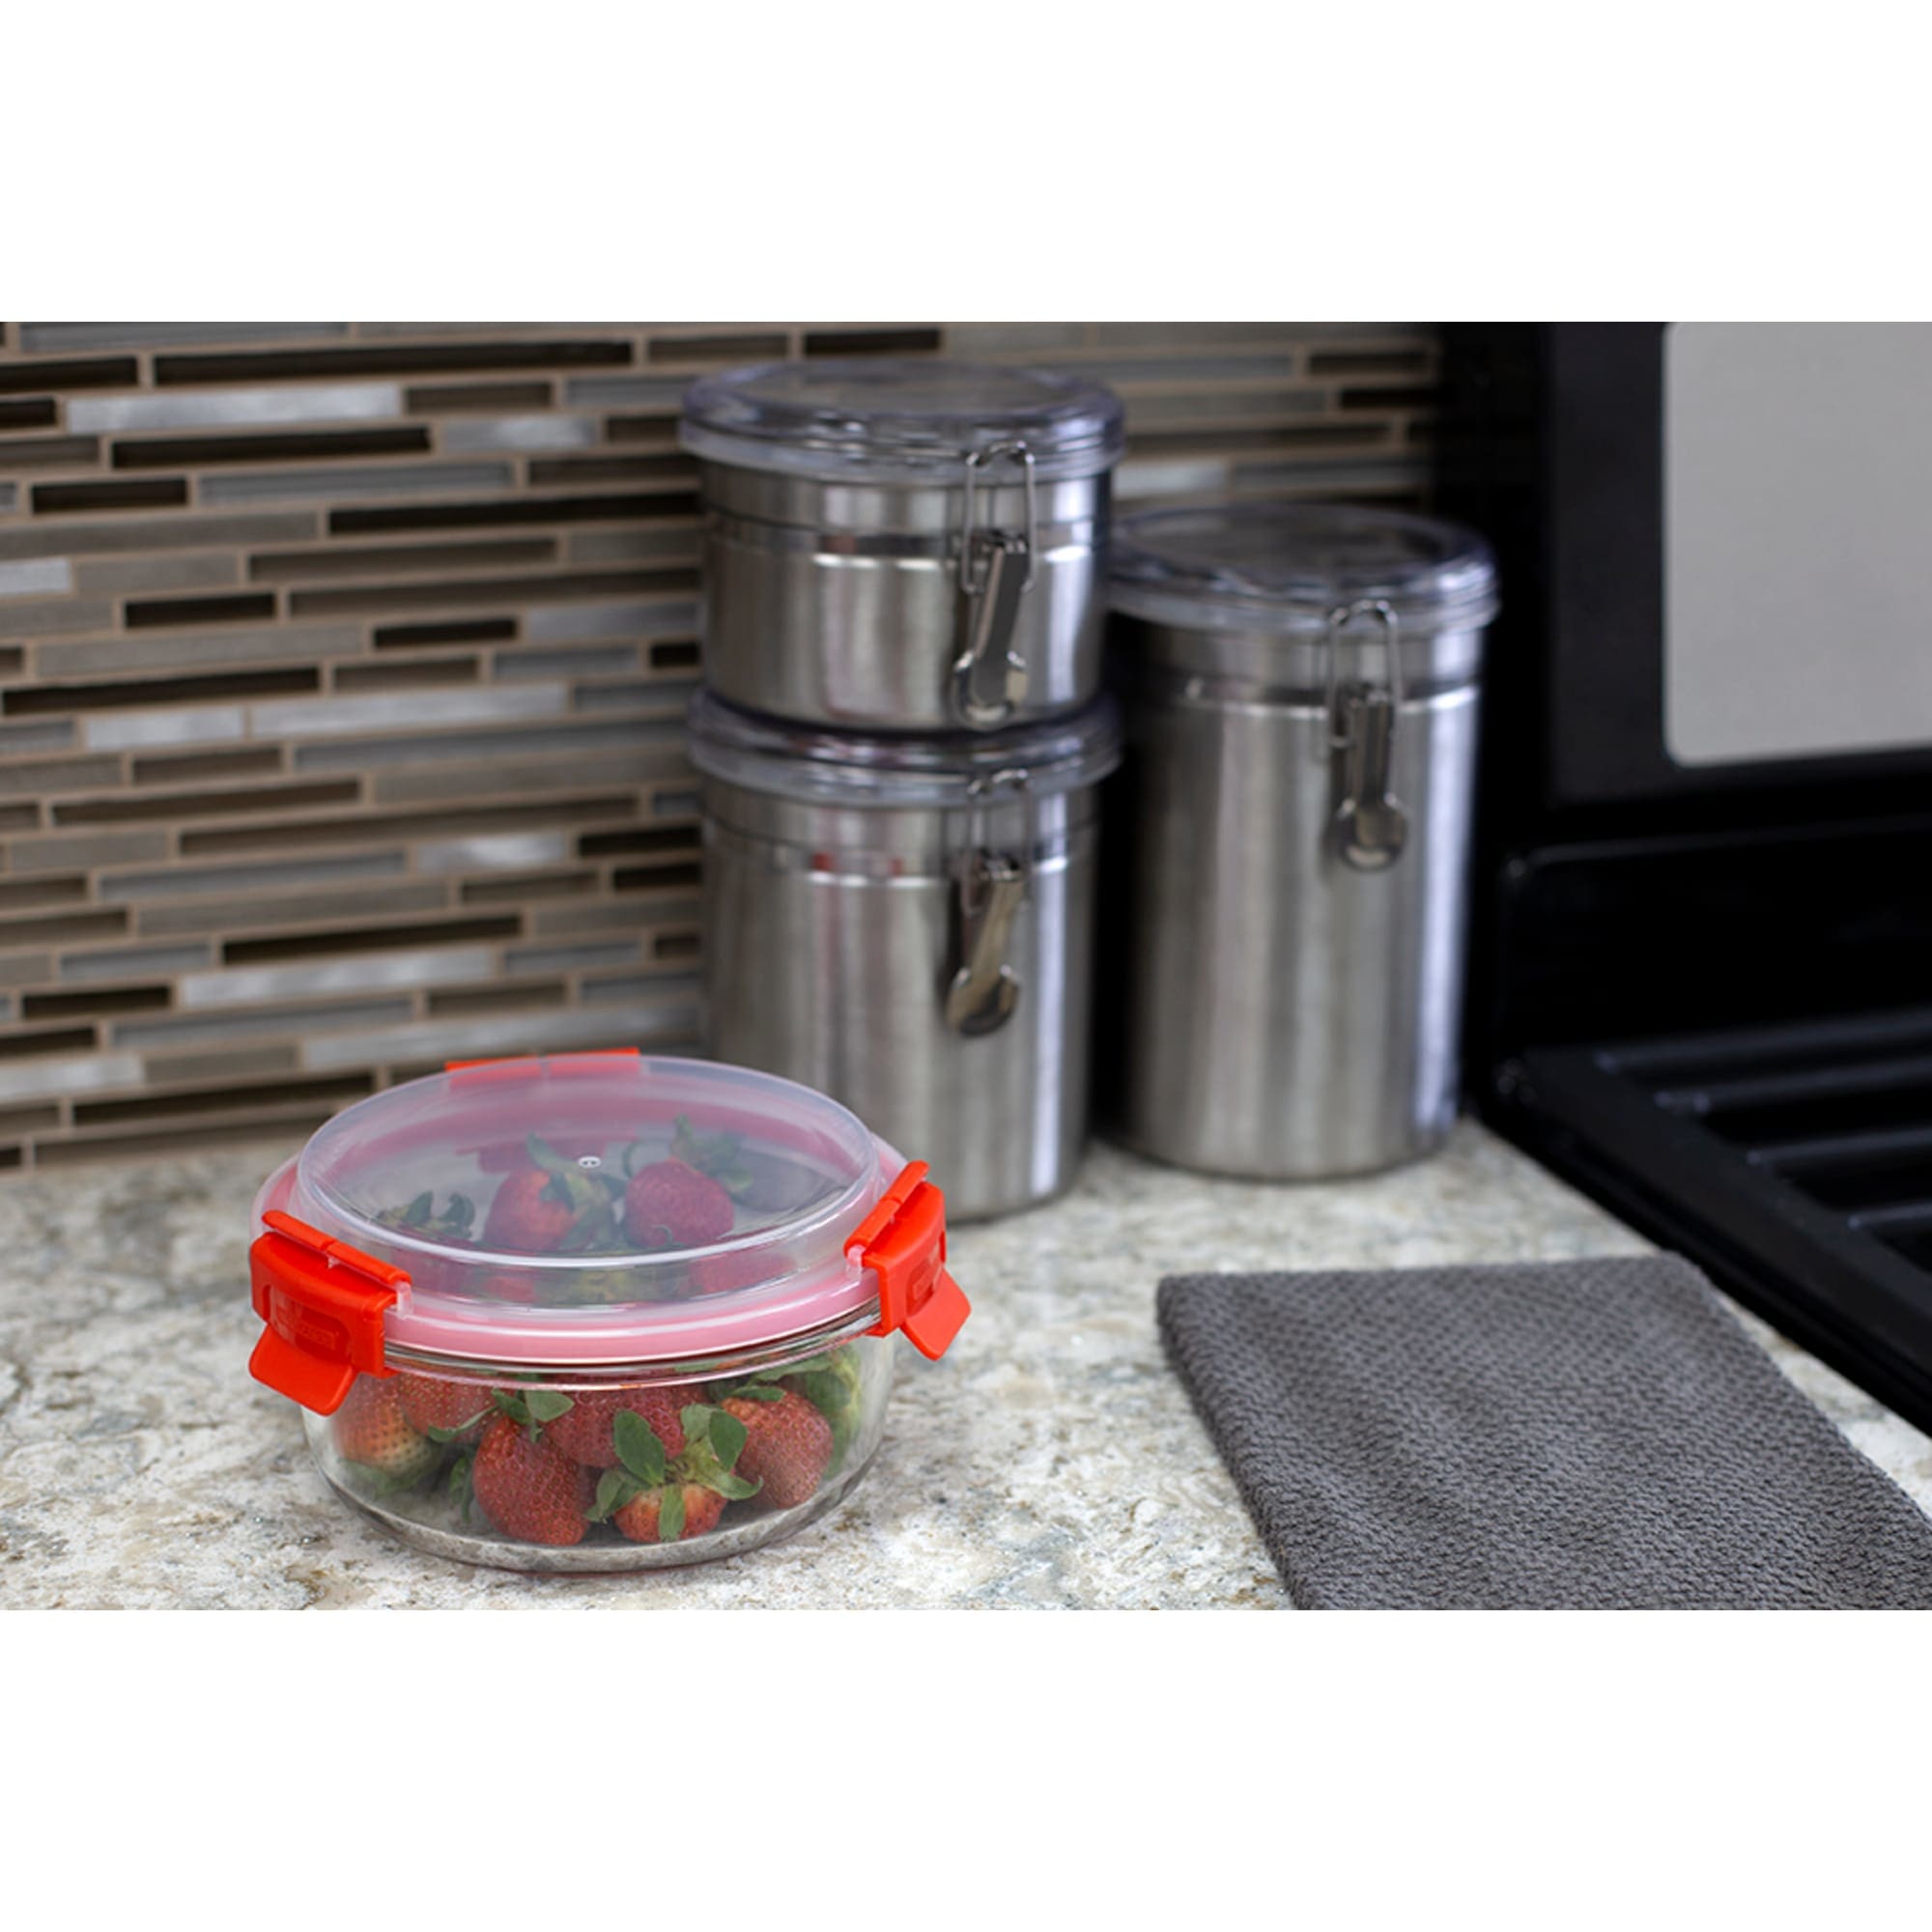 Home Basics 32oz. Round Glass Food Storage Container With Plastic Lid, Red $6.00 EACH, CASE PACK OF 12